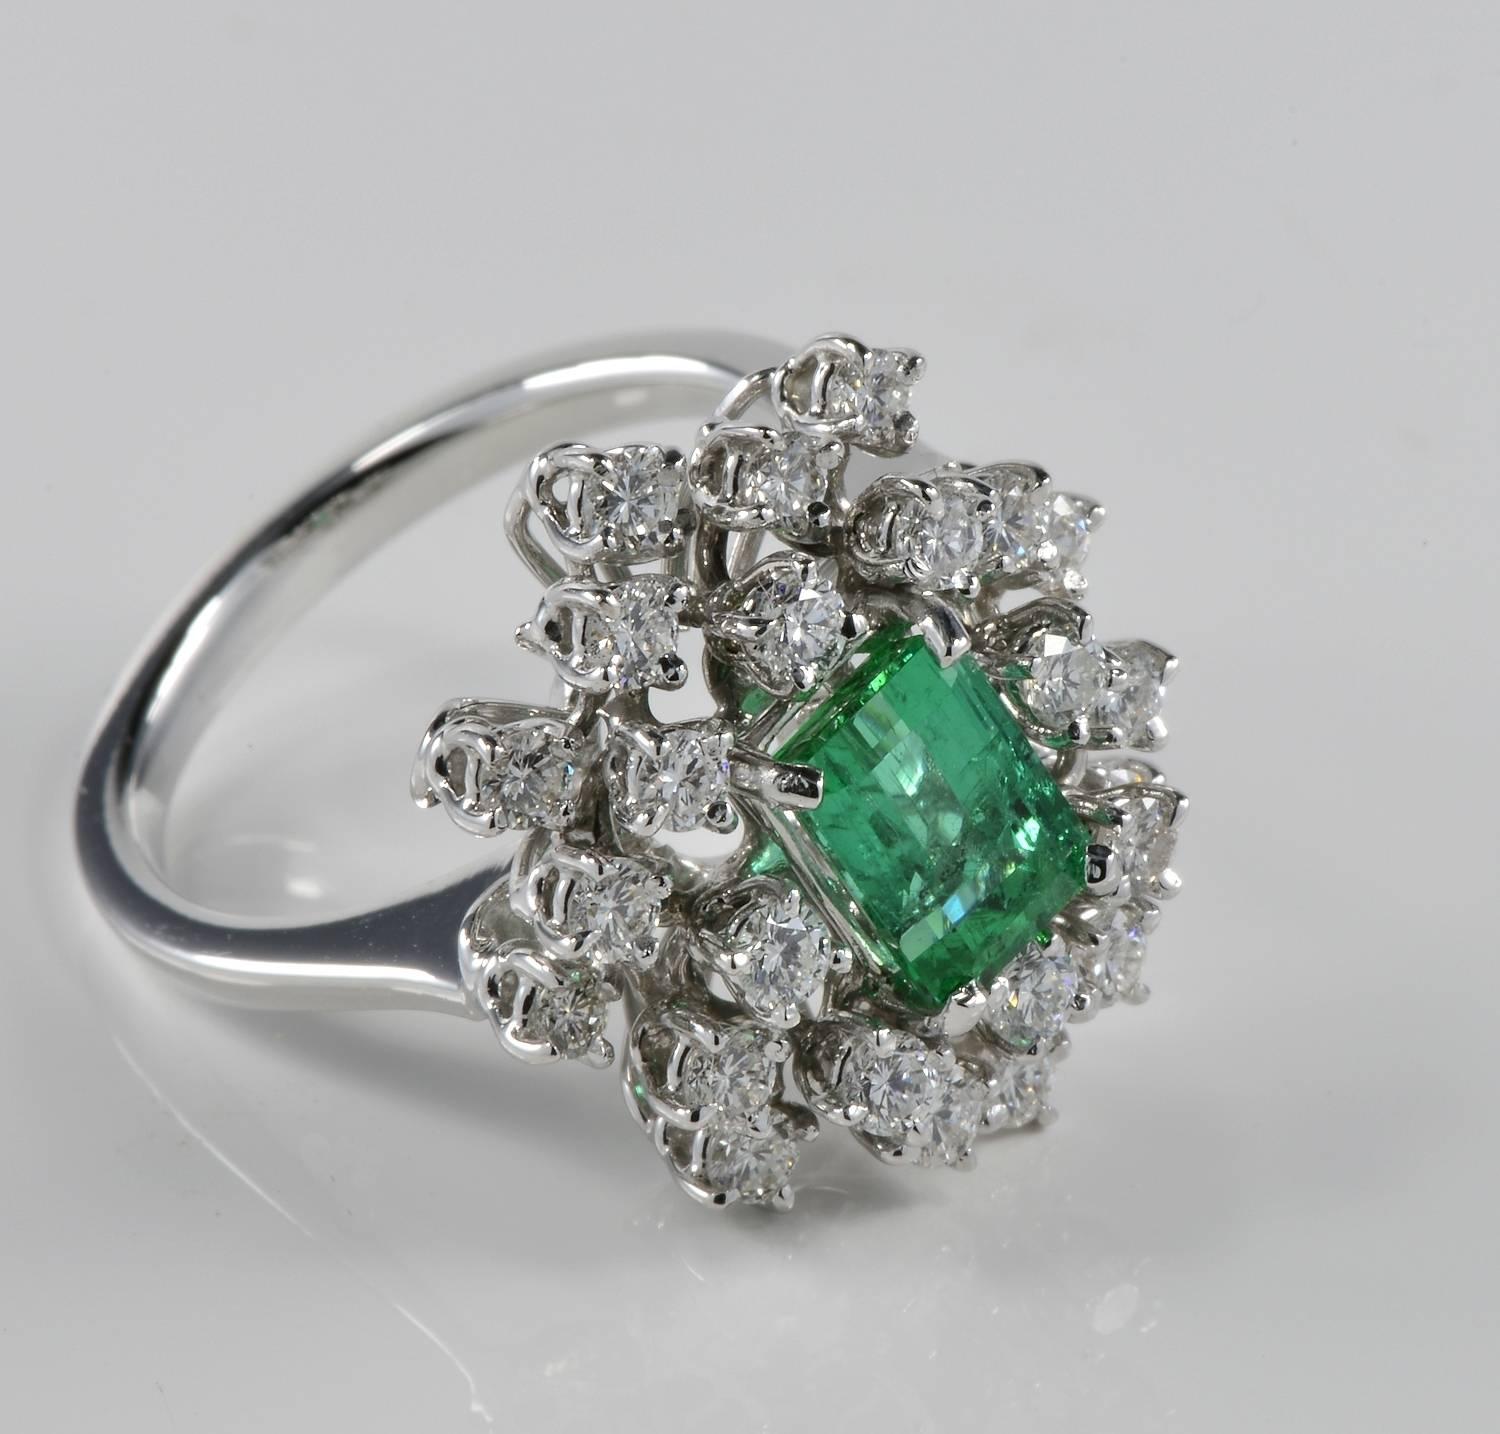 Superior in quality classy vintage cluster ring set with top quality Natural Emerald 1.70 Ct (7.78 mm. x 5.49 mm.) Colombian origin prizing a fine degree for colour and clarity.
The rich Diamond surround totalling 1.50 Ct rated G VVS/VS